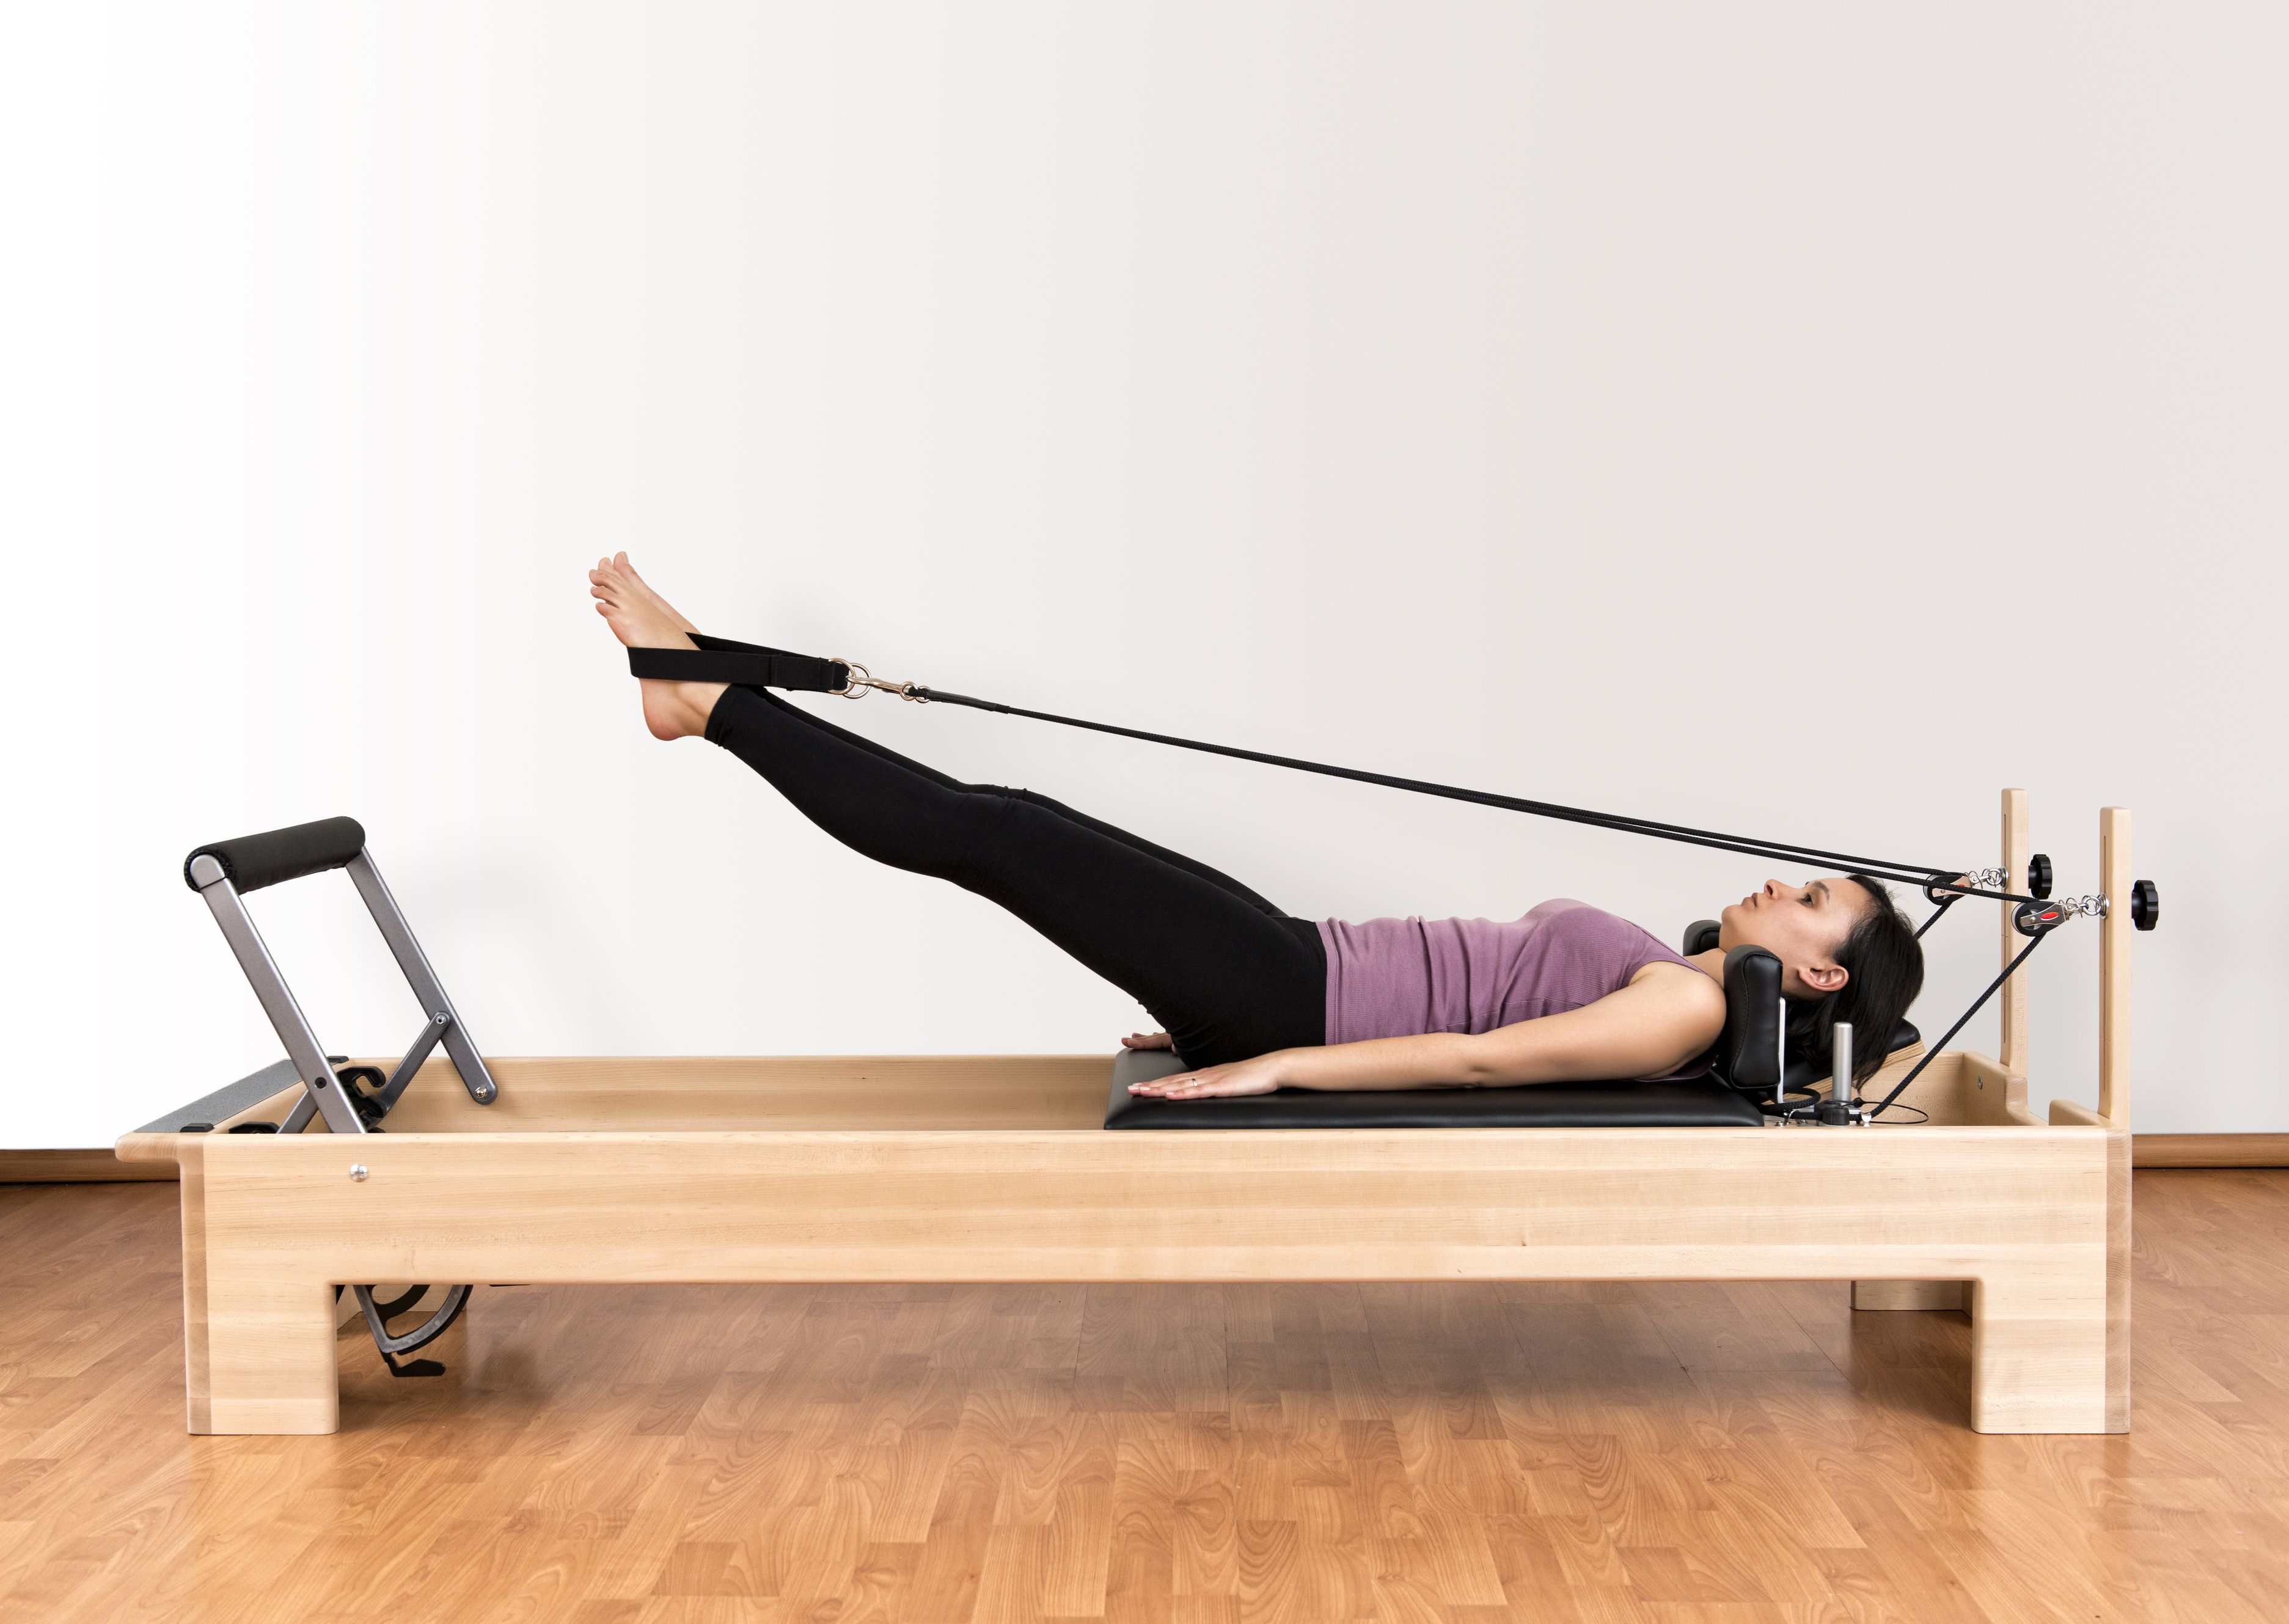 The Anatomy of a Classical Pilates Reformer